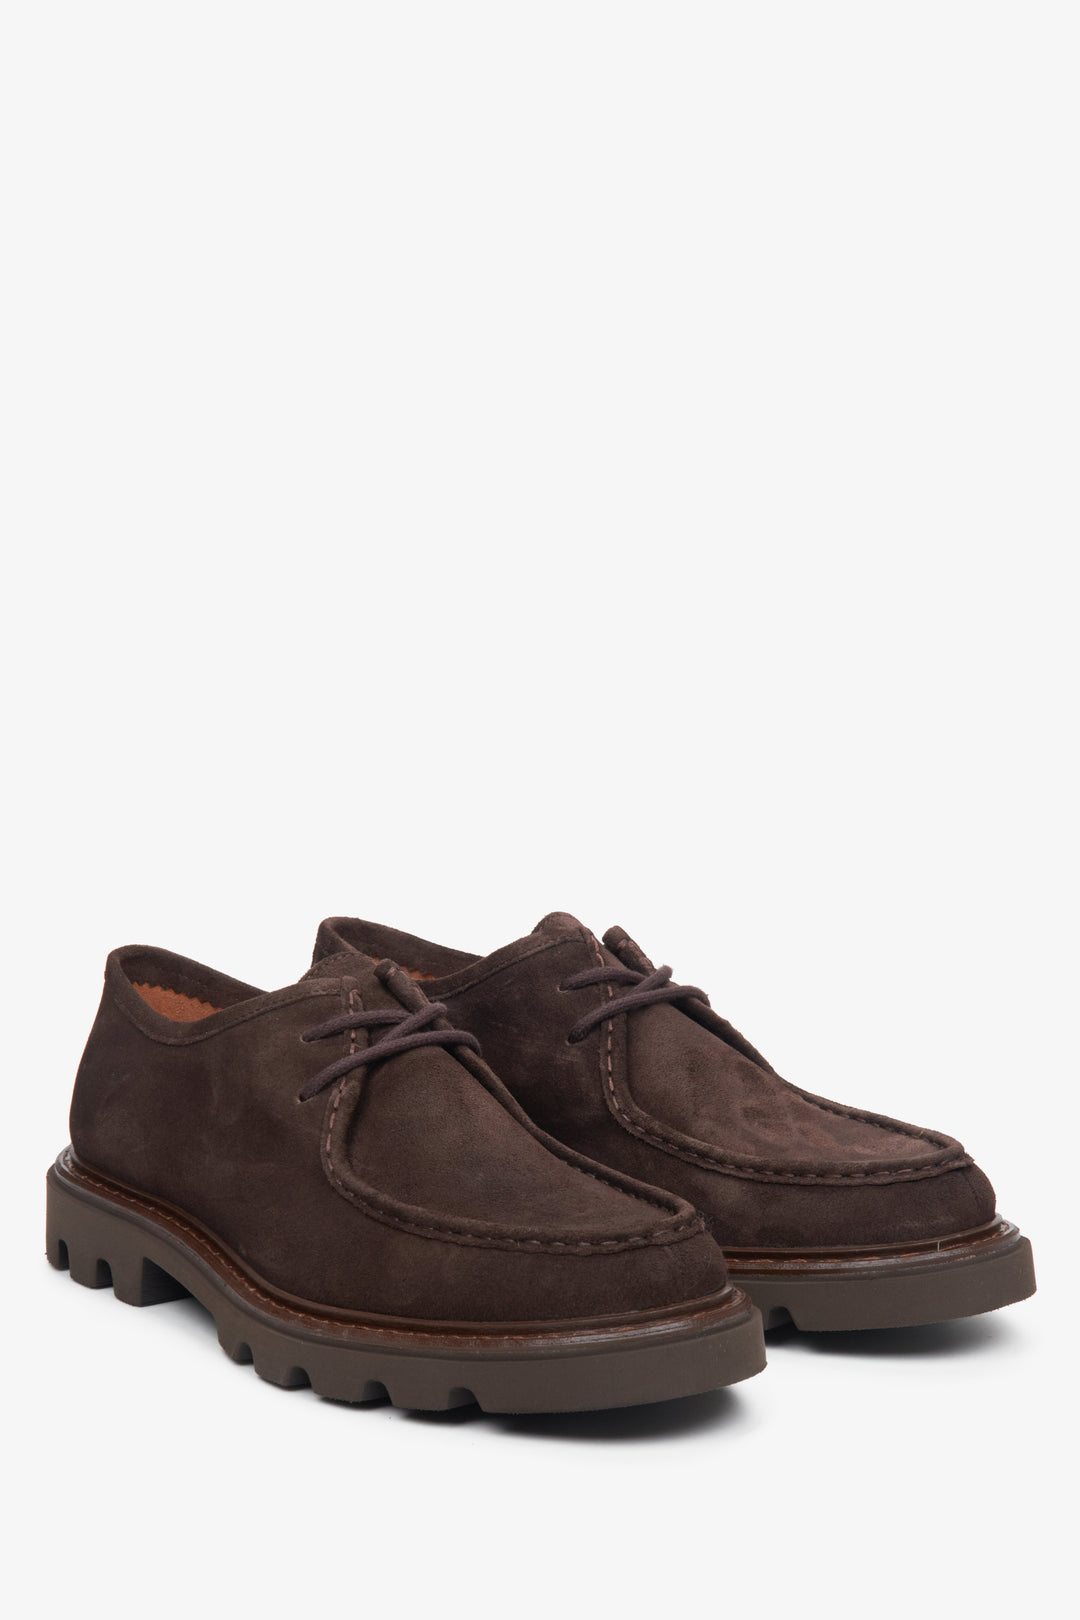 Men's dark brown boots made of genuine velour with short lacing by Estro.